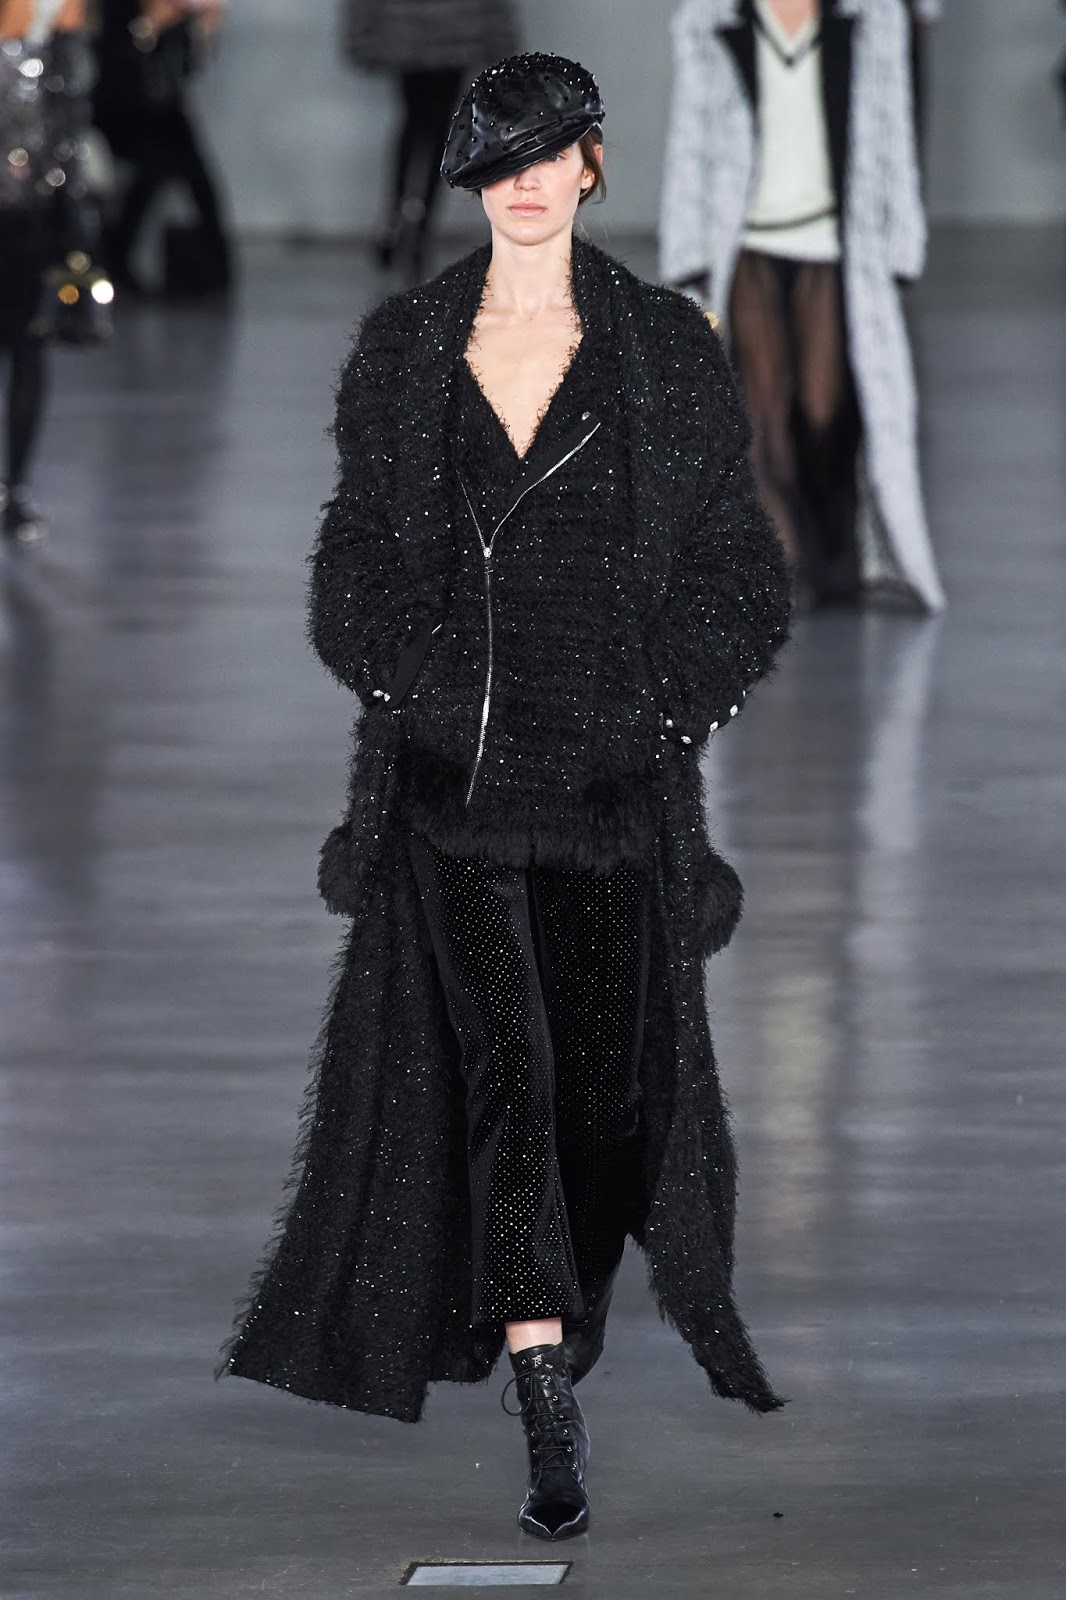 Couture Carrie: Dark & Dramatic Coats